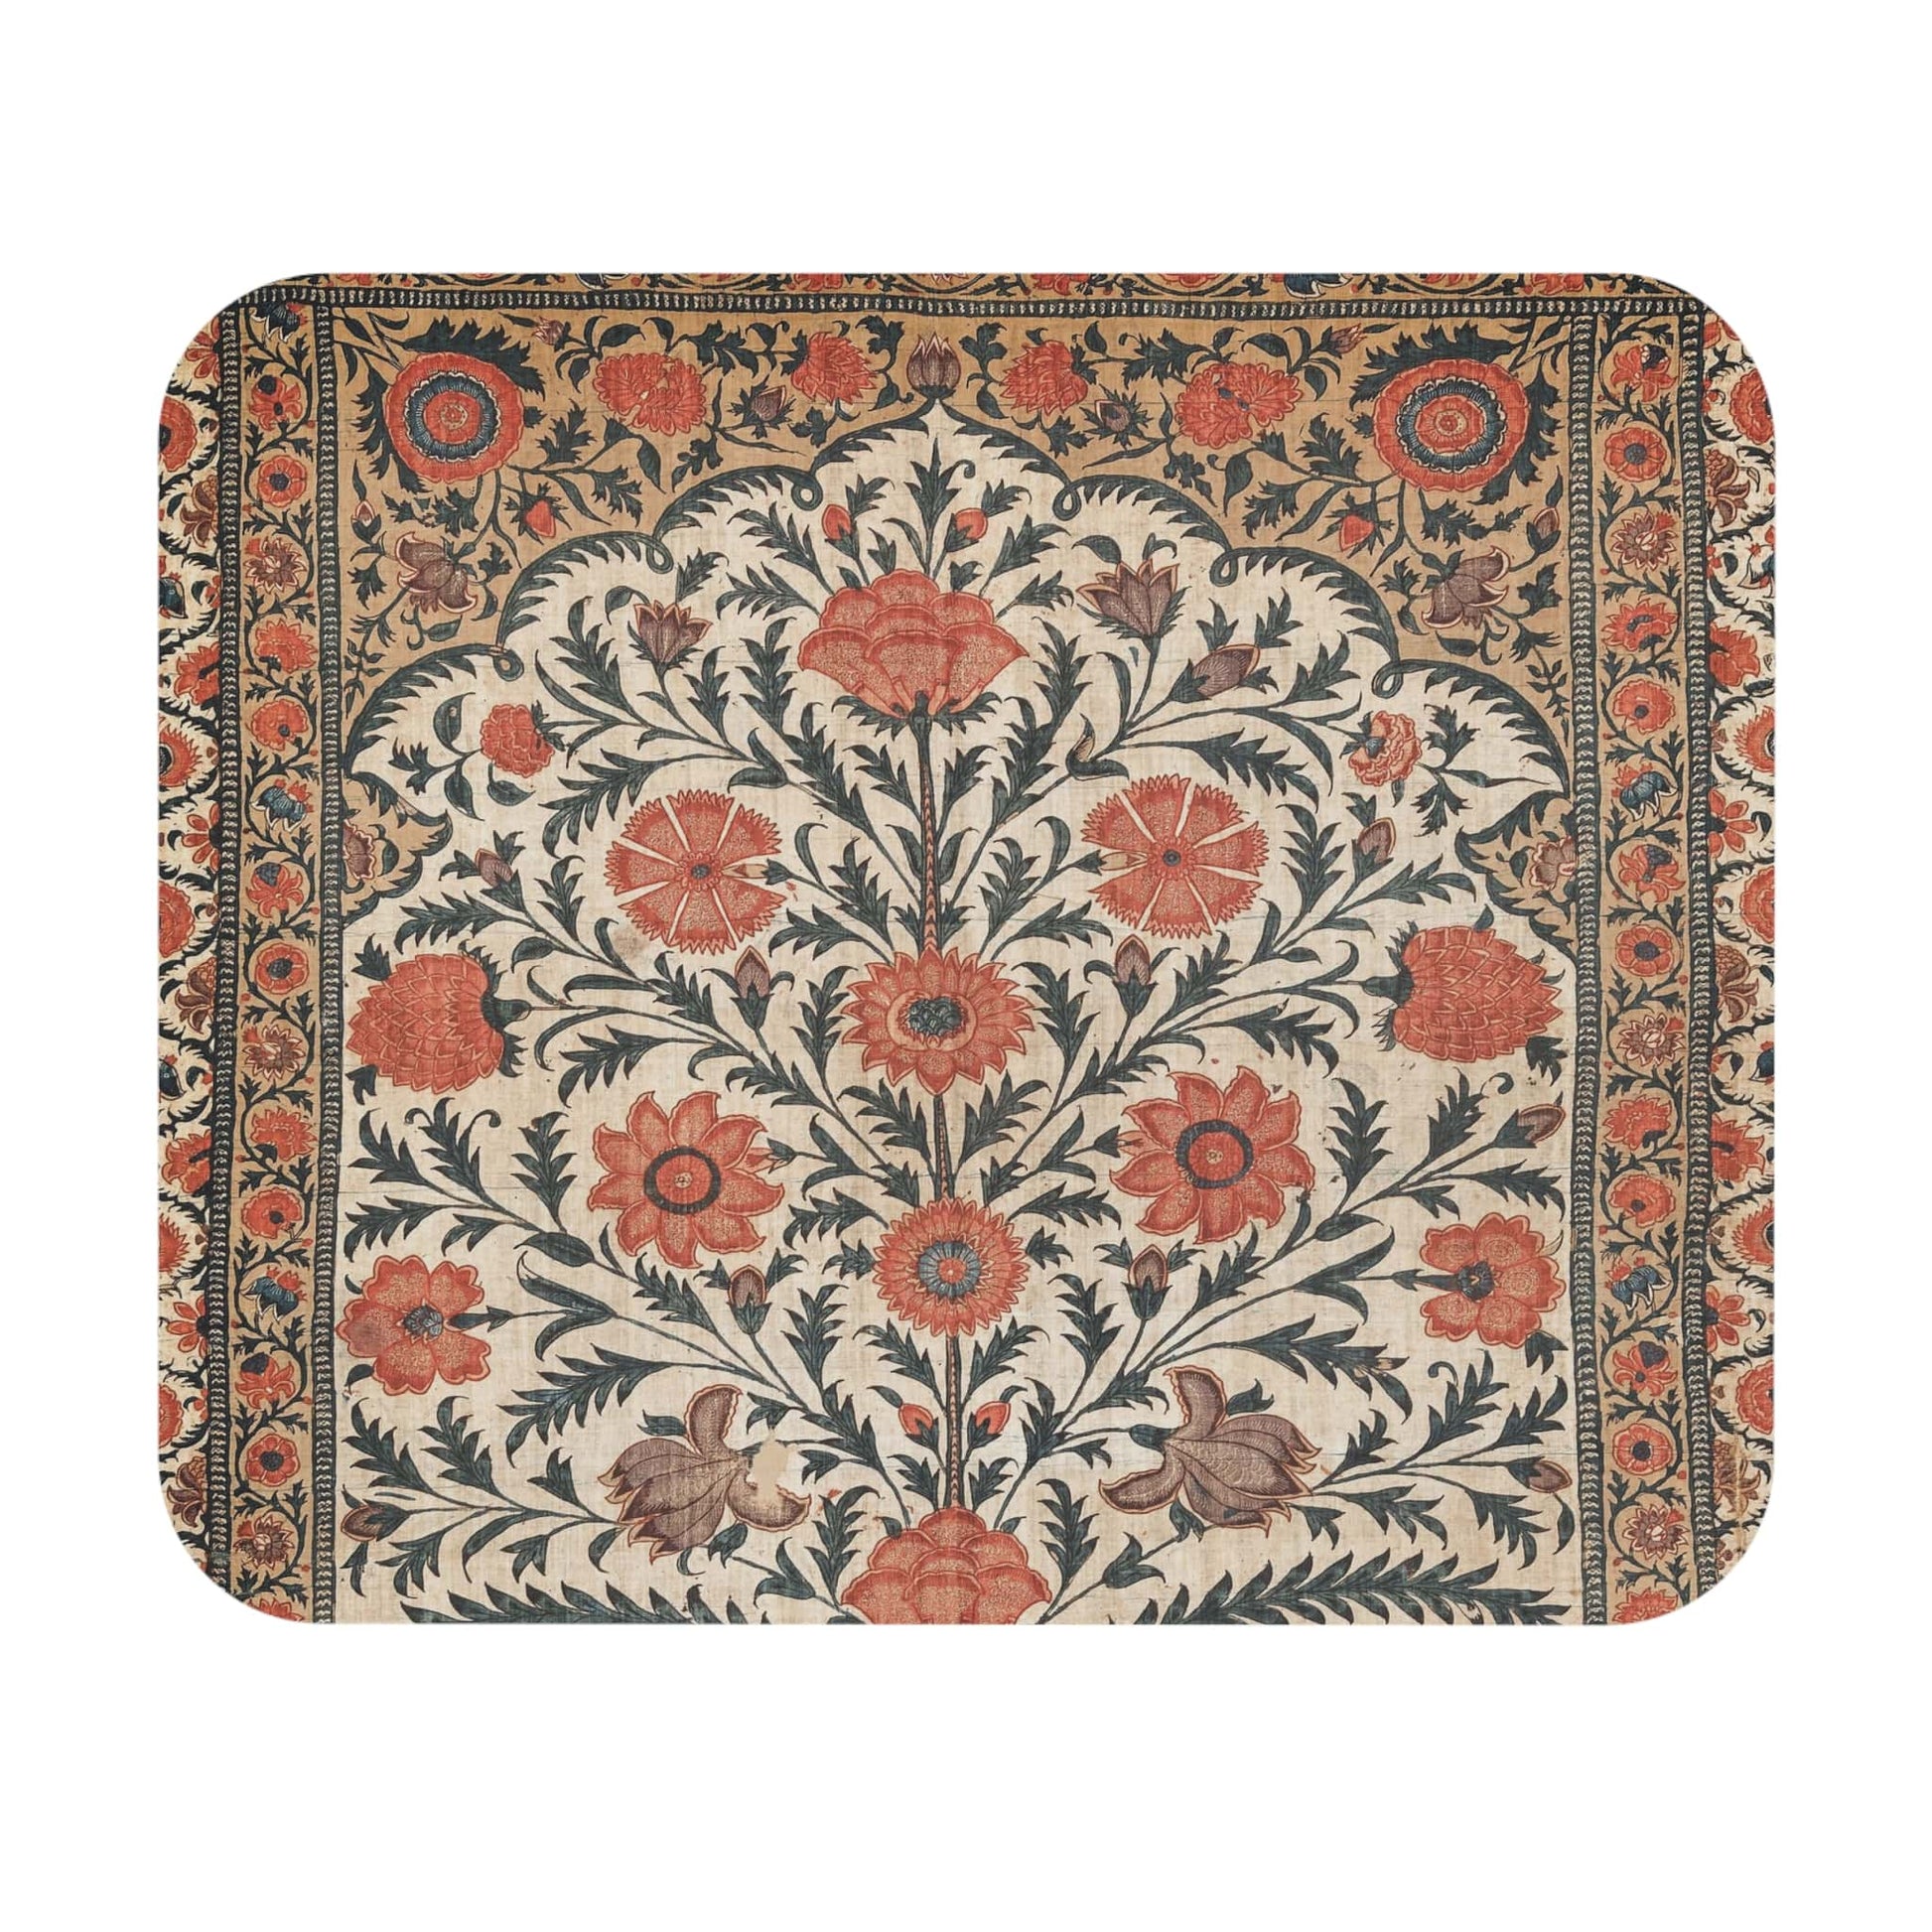 Flower Pattern Mouse Pad with floral plant design, desk and office decor showcasing detailed plant and flower artwork.